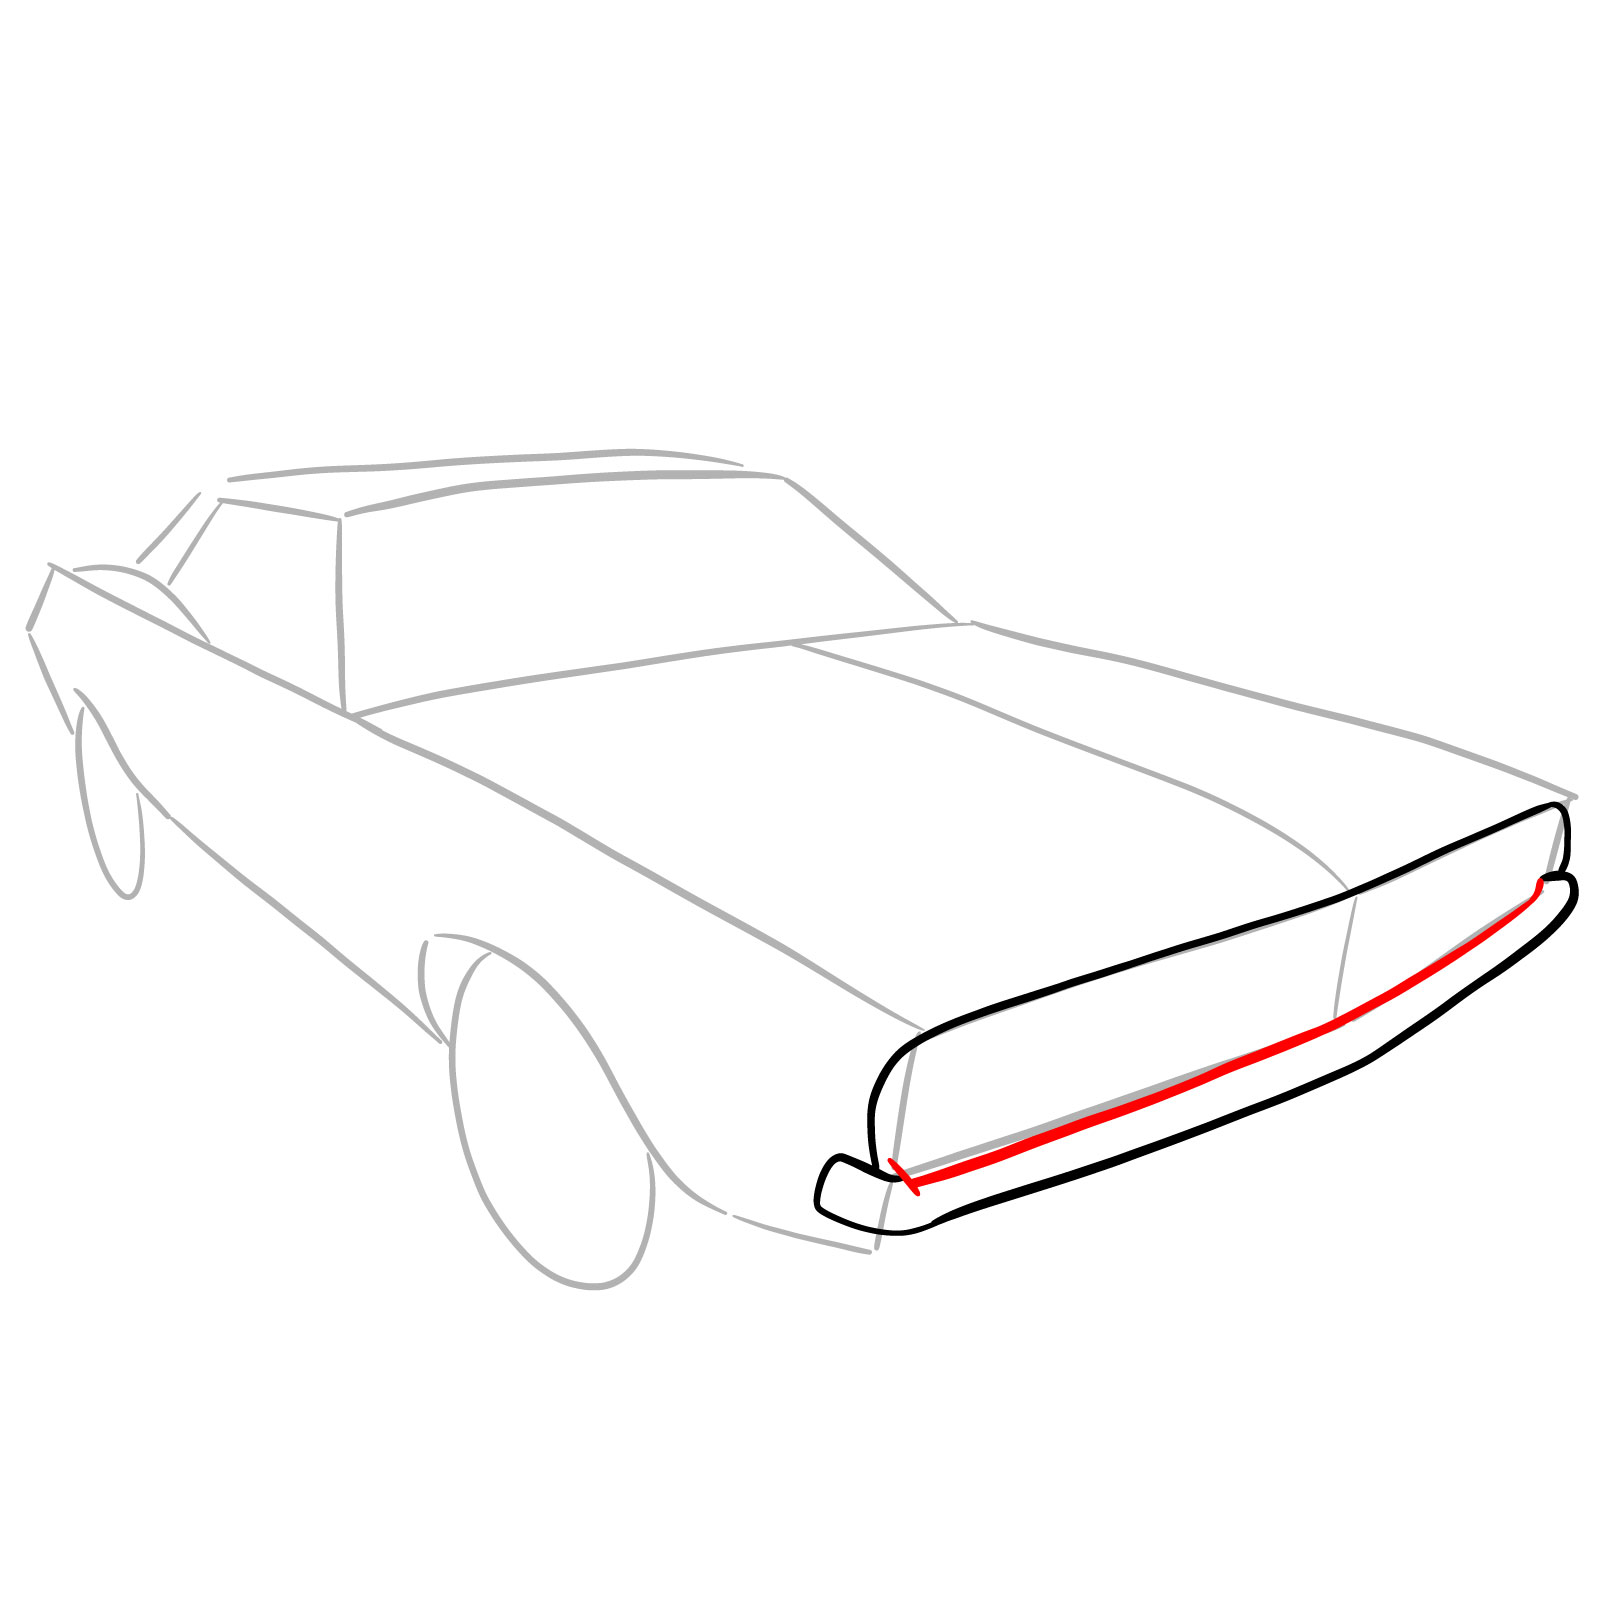 How to draw Dodge Challenger 1970 - step 06